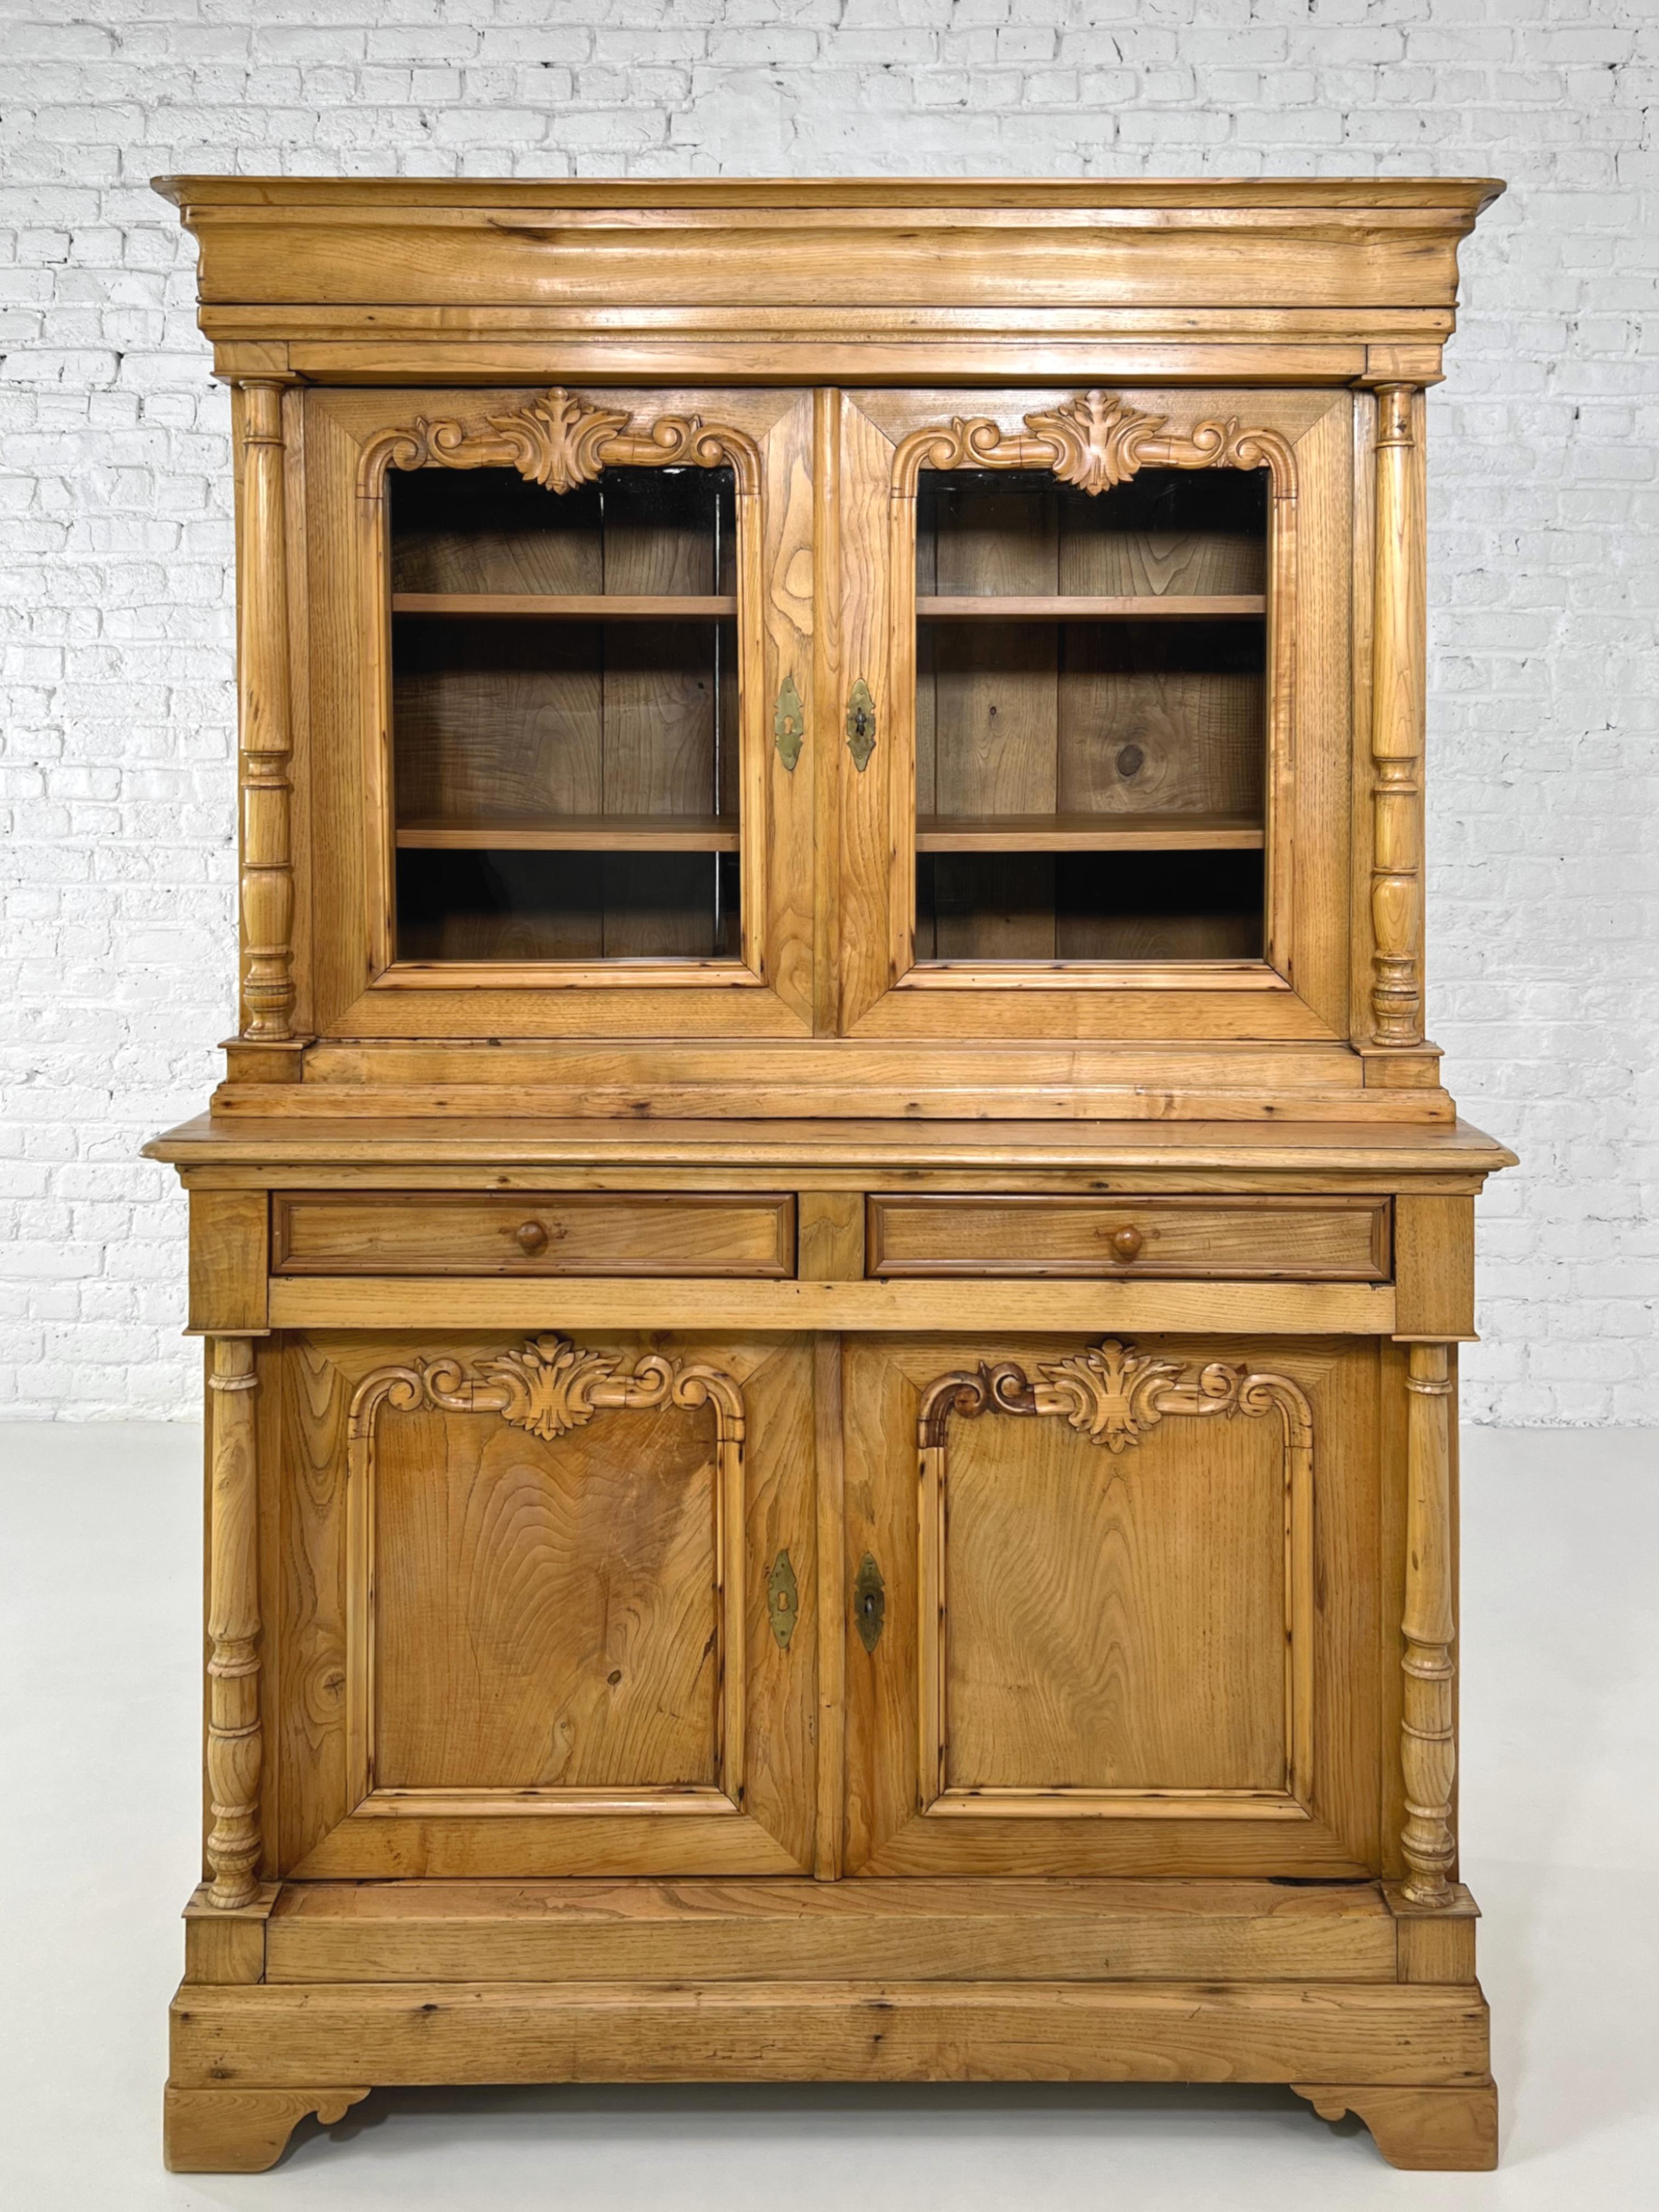  19th-20th French Antic Pine Wood and Glass Armoire or Vitrine Cabinet composed of 2 parts:

Up one with vitrine storage spaces, 2 graphic glass panel doors with fine sculpted finishes, opening on wooden shelves 
Bottom one with closed spaces,